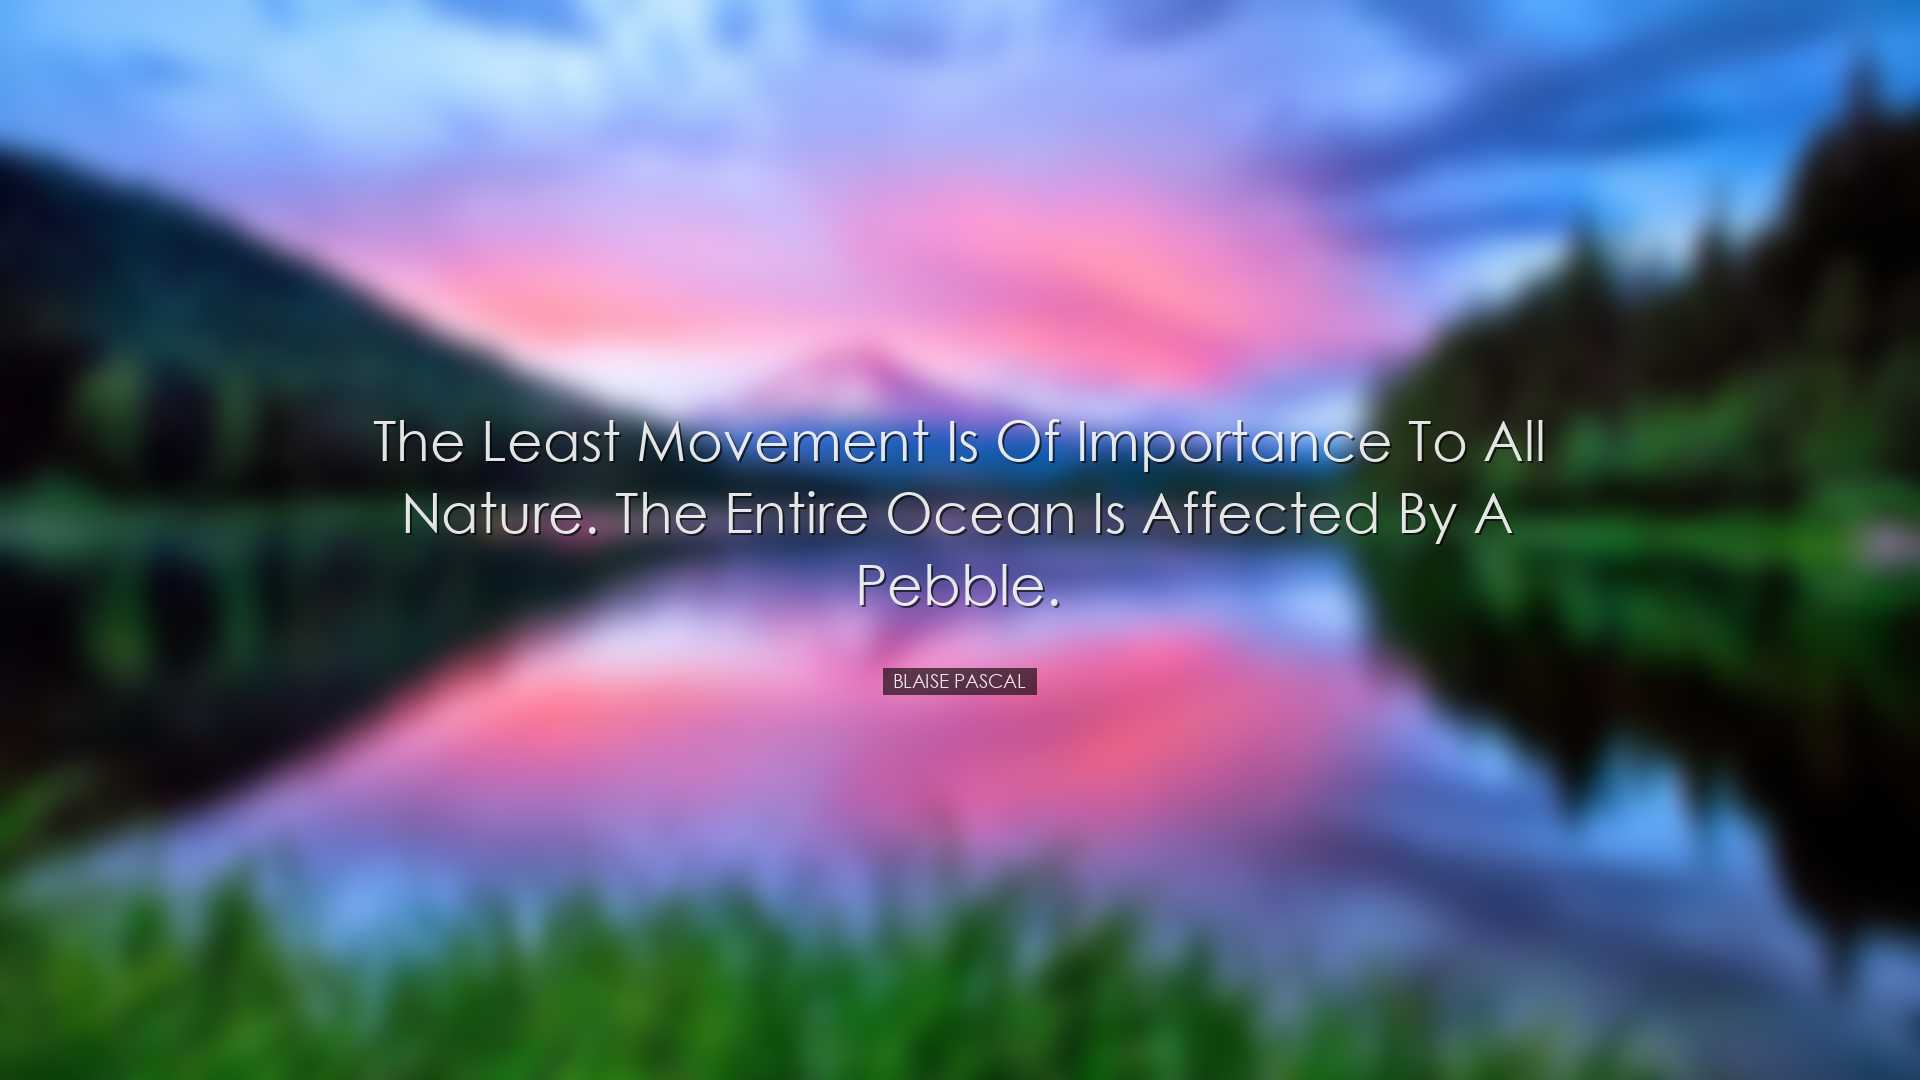 The least movement is of importance to all nature. The entire ocea